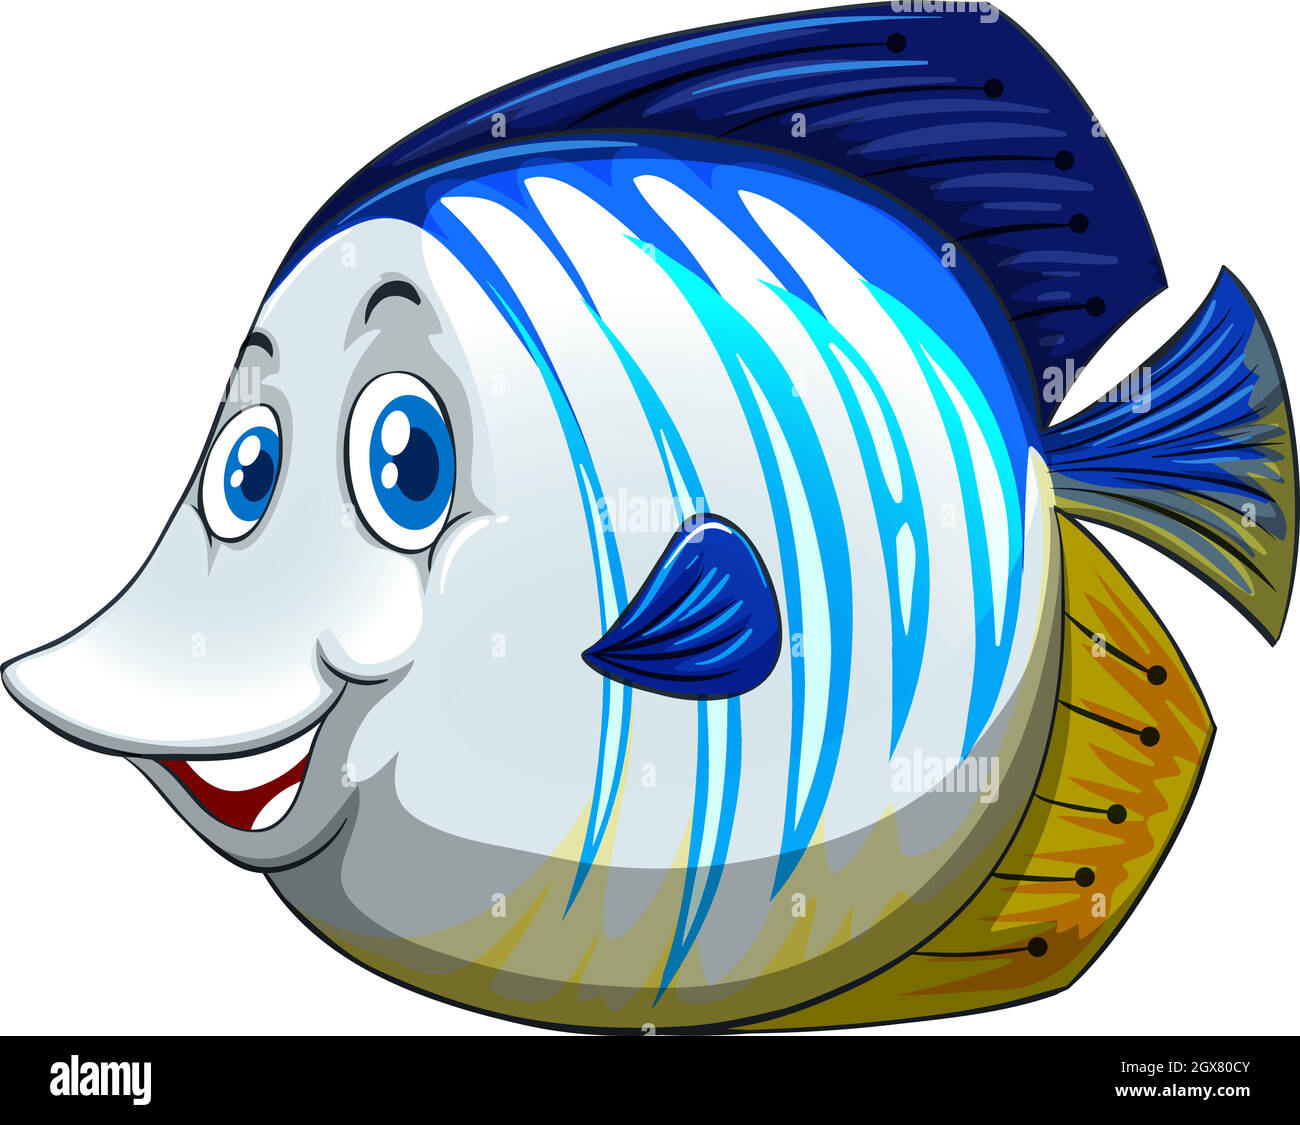 Fish face Stock Vector Images - Alamy